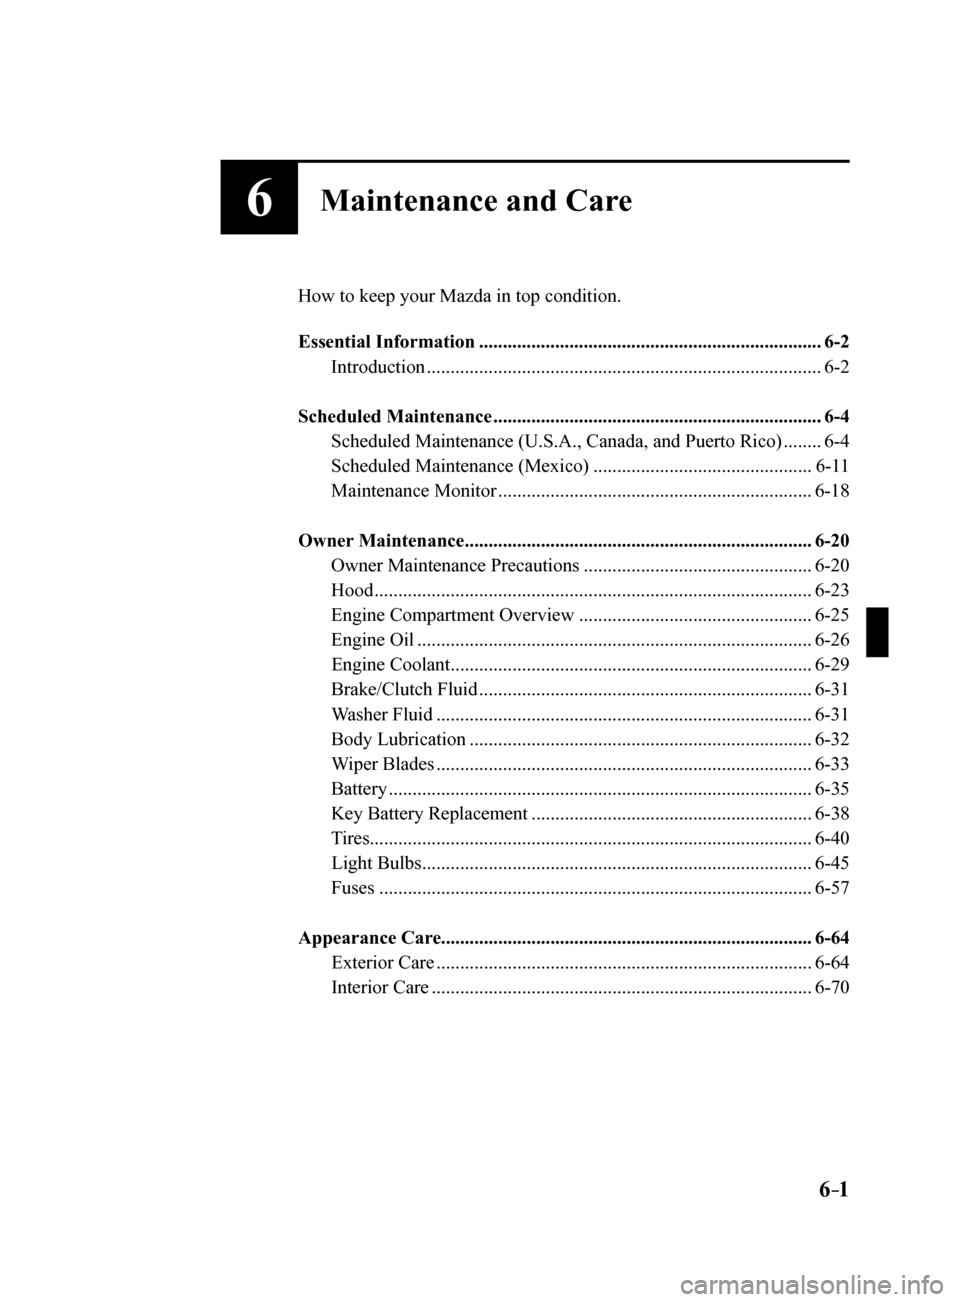 MAZDA MODEL 6 2017  Owners Manual (in English) 6–1
6Maintenance and Care
How to keep your Mazda in top condition.
Essential Information ........................................................................\
6-2
Introduction  .................